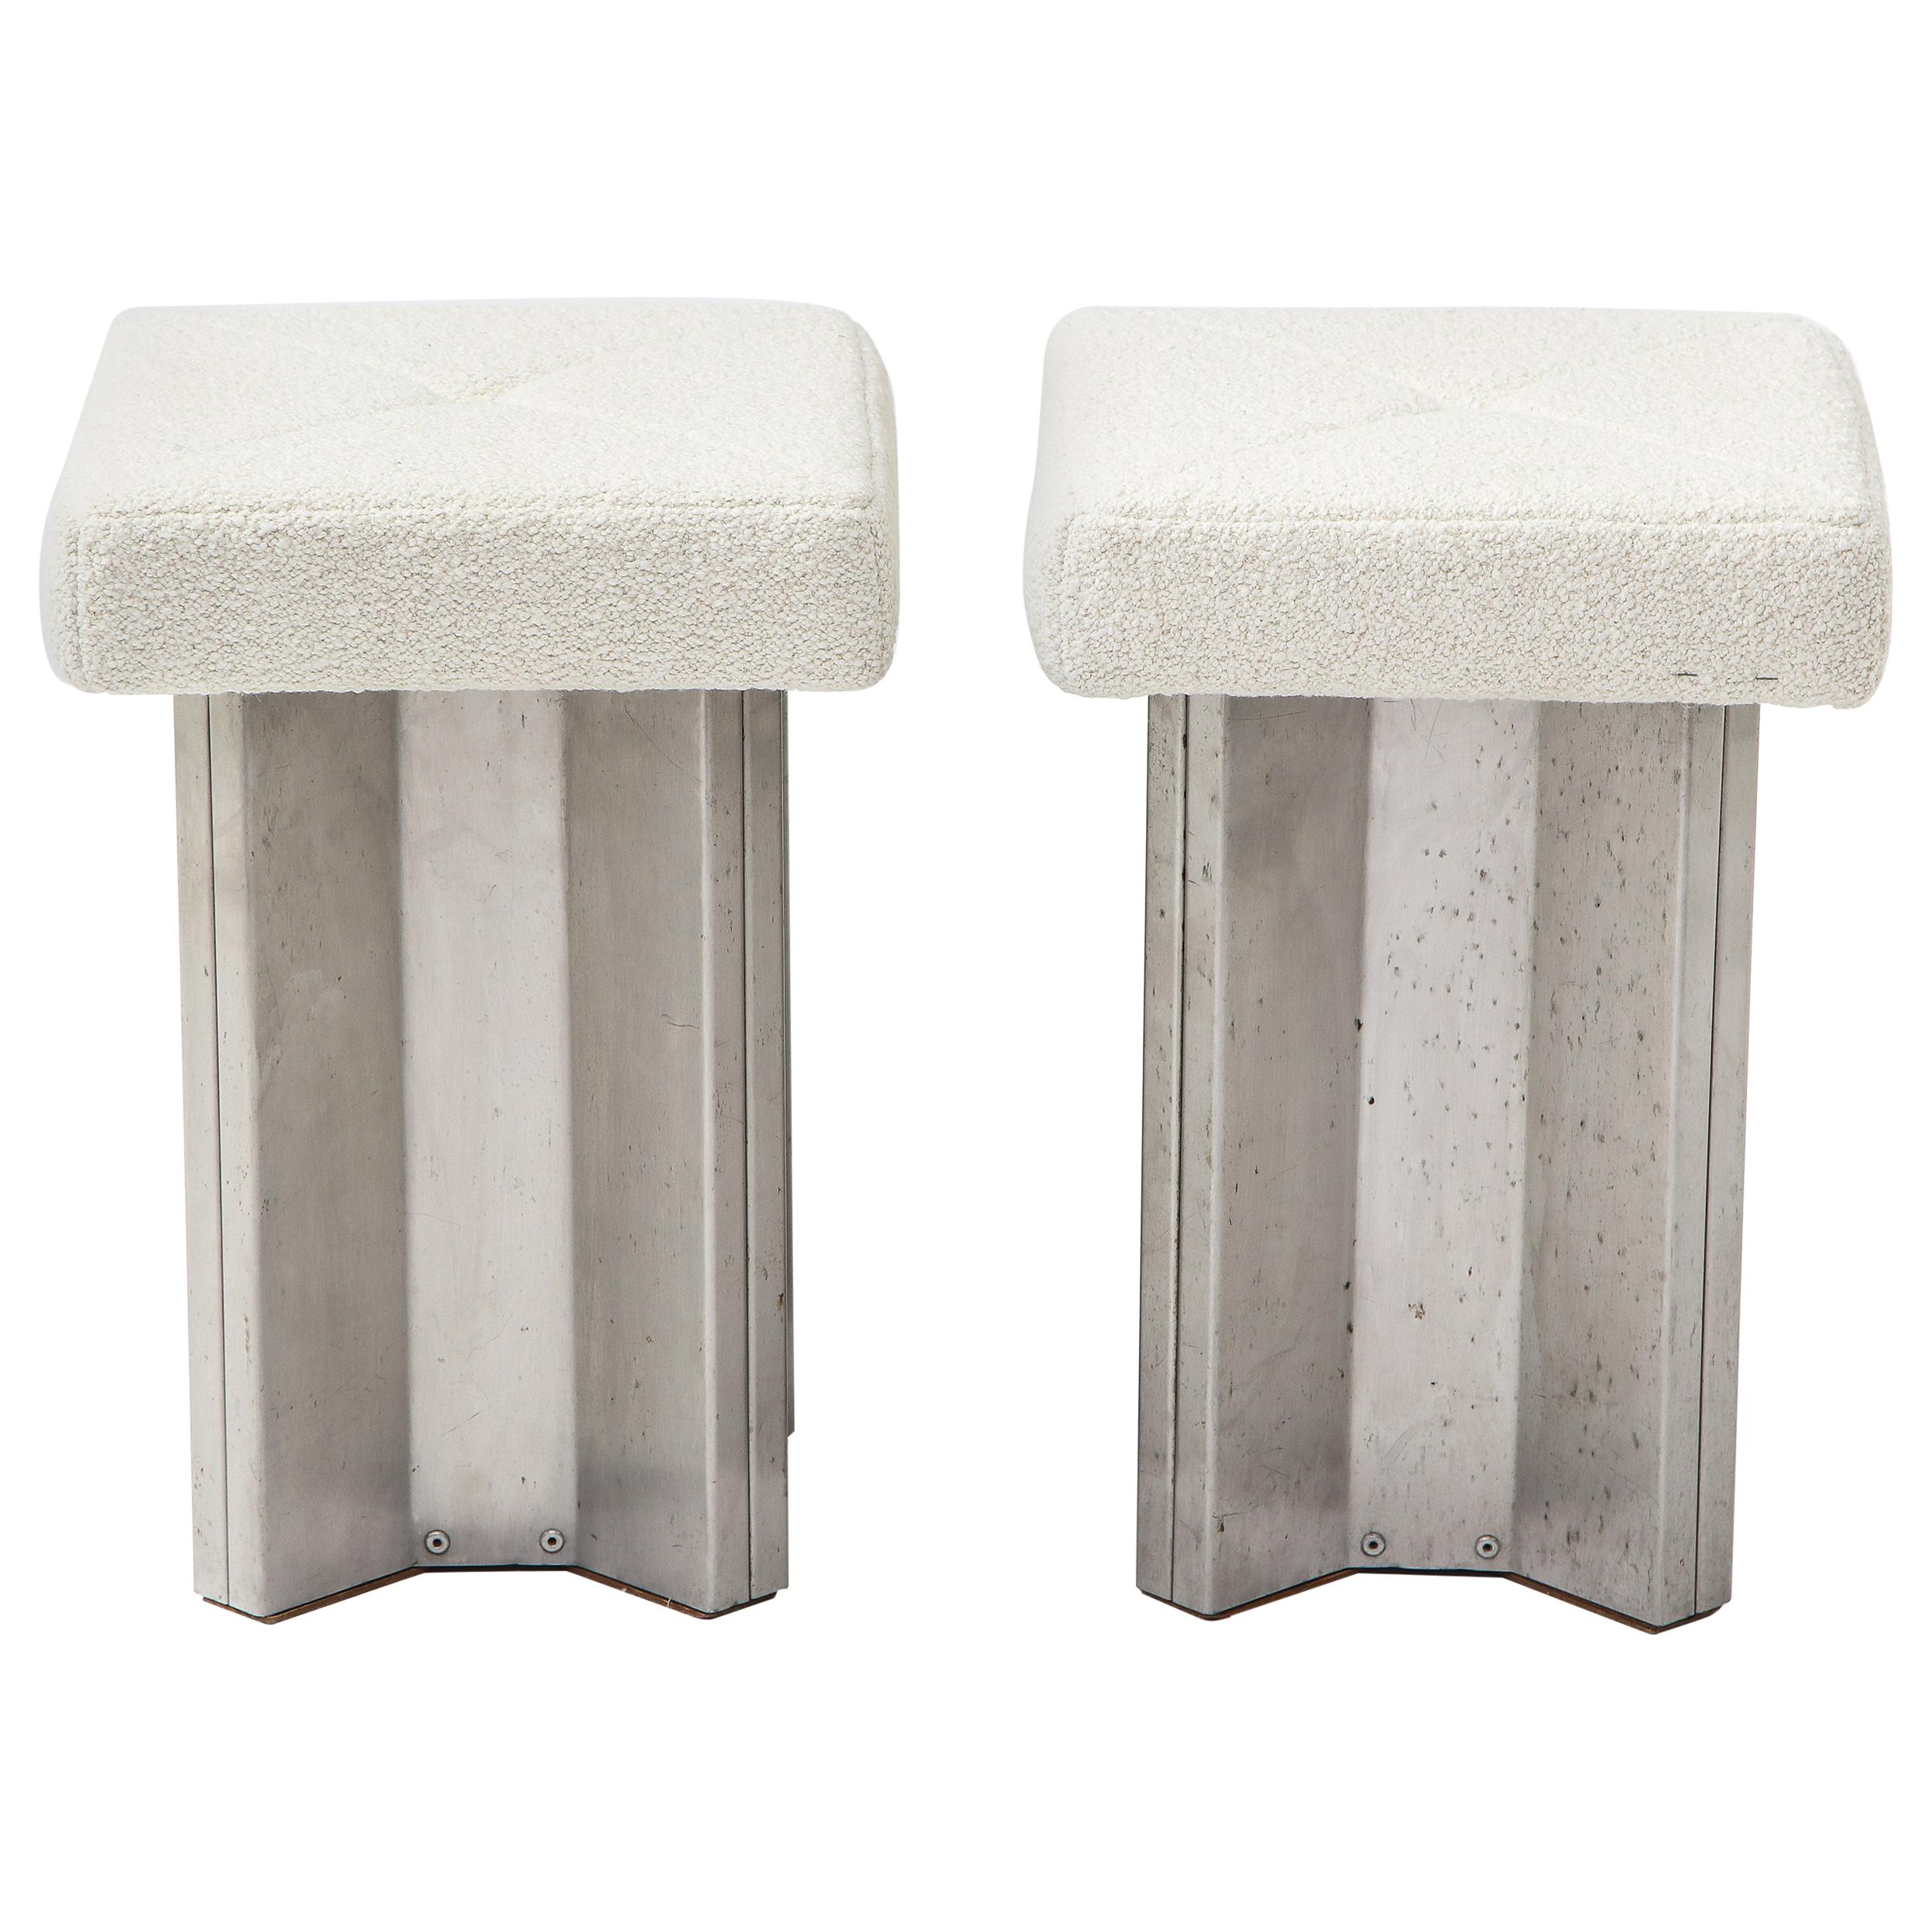 Stainless steel stools by Maison Jansen, newly upholstered.